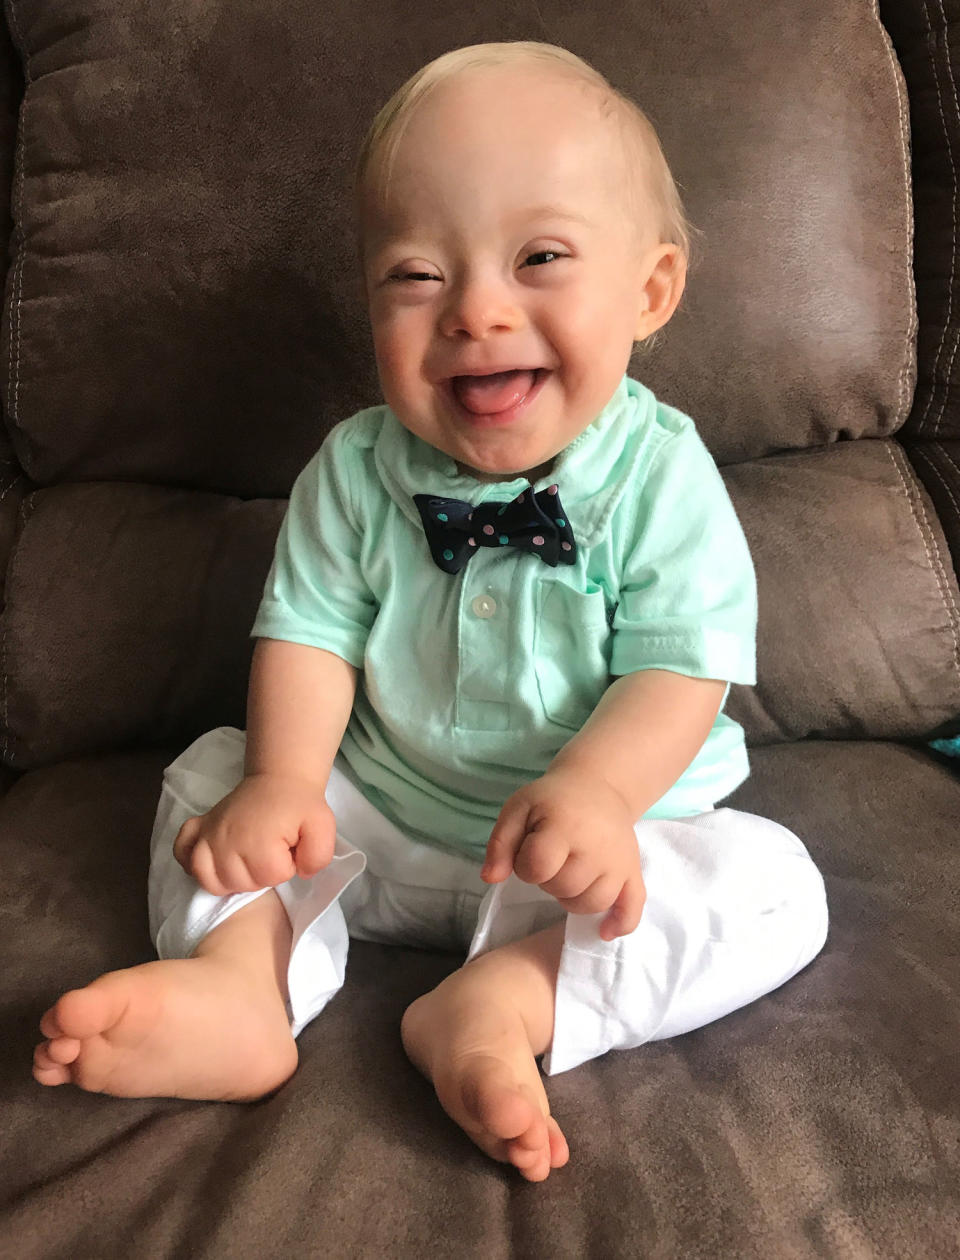 The winning photo of Lucas, submitted by his mom, Cortney Warren, to the Gerber Spokesbaby contest. (Gerber/Cortney Warren)